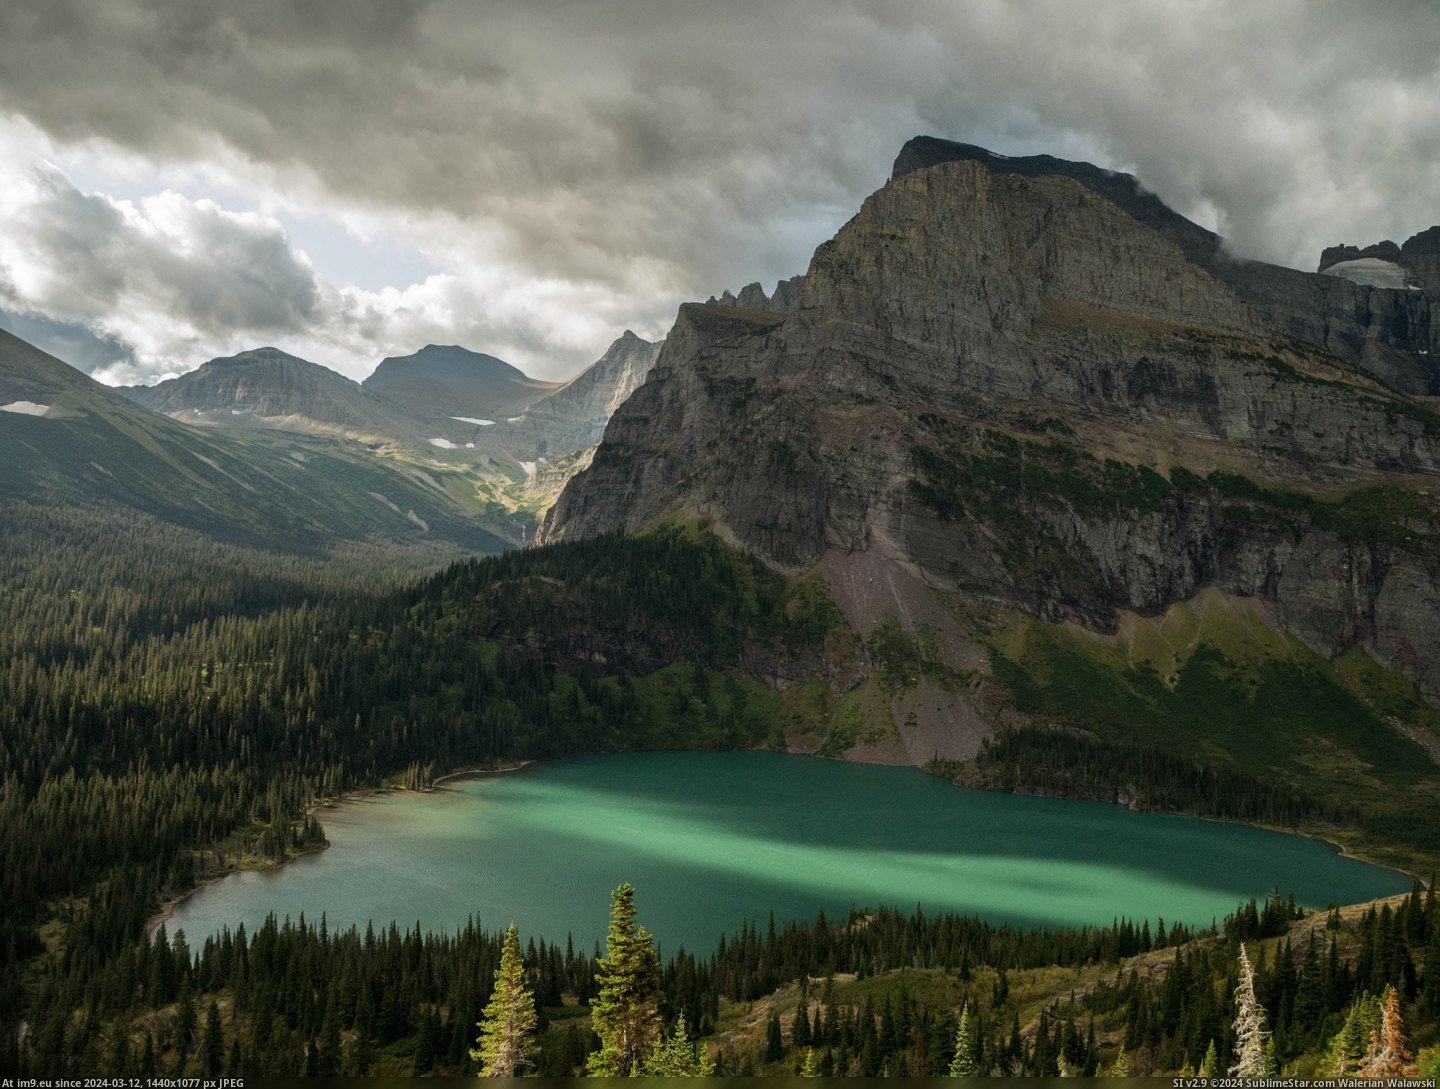 #Lake #4000x3000 #Timelapse #Montana [Earthporn] Grinnell Lake, Montana  [4000x3000] (4K Timelapse in Comments) Pic. (Bild von album My r/EARTHPORN favs))